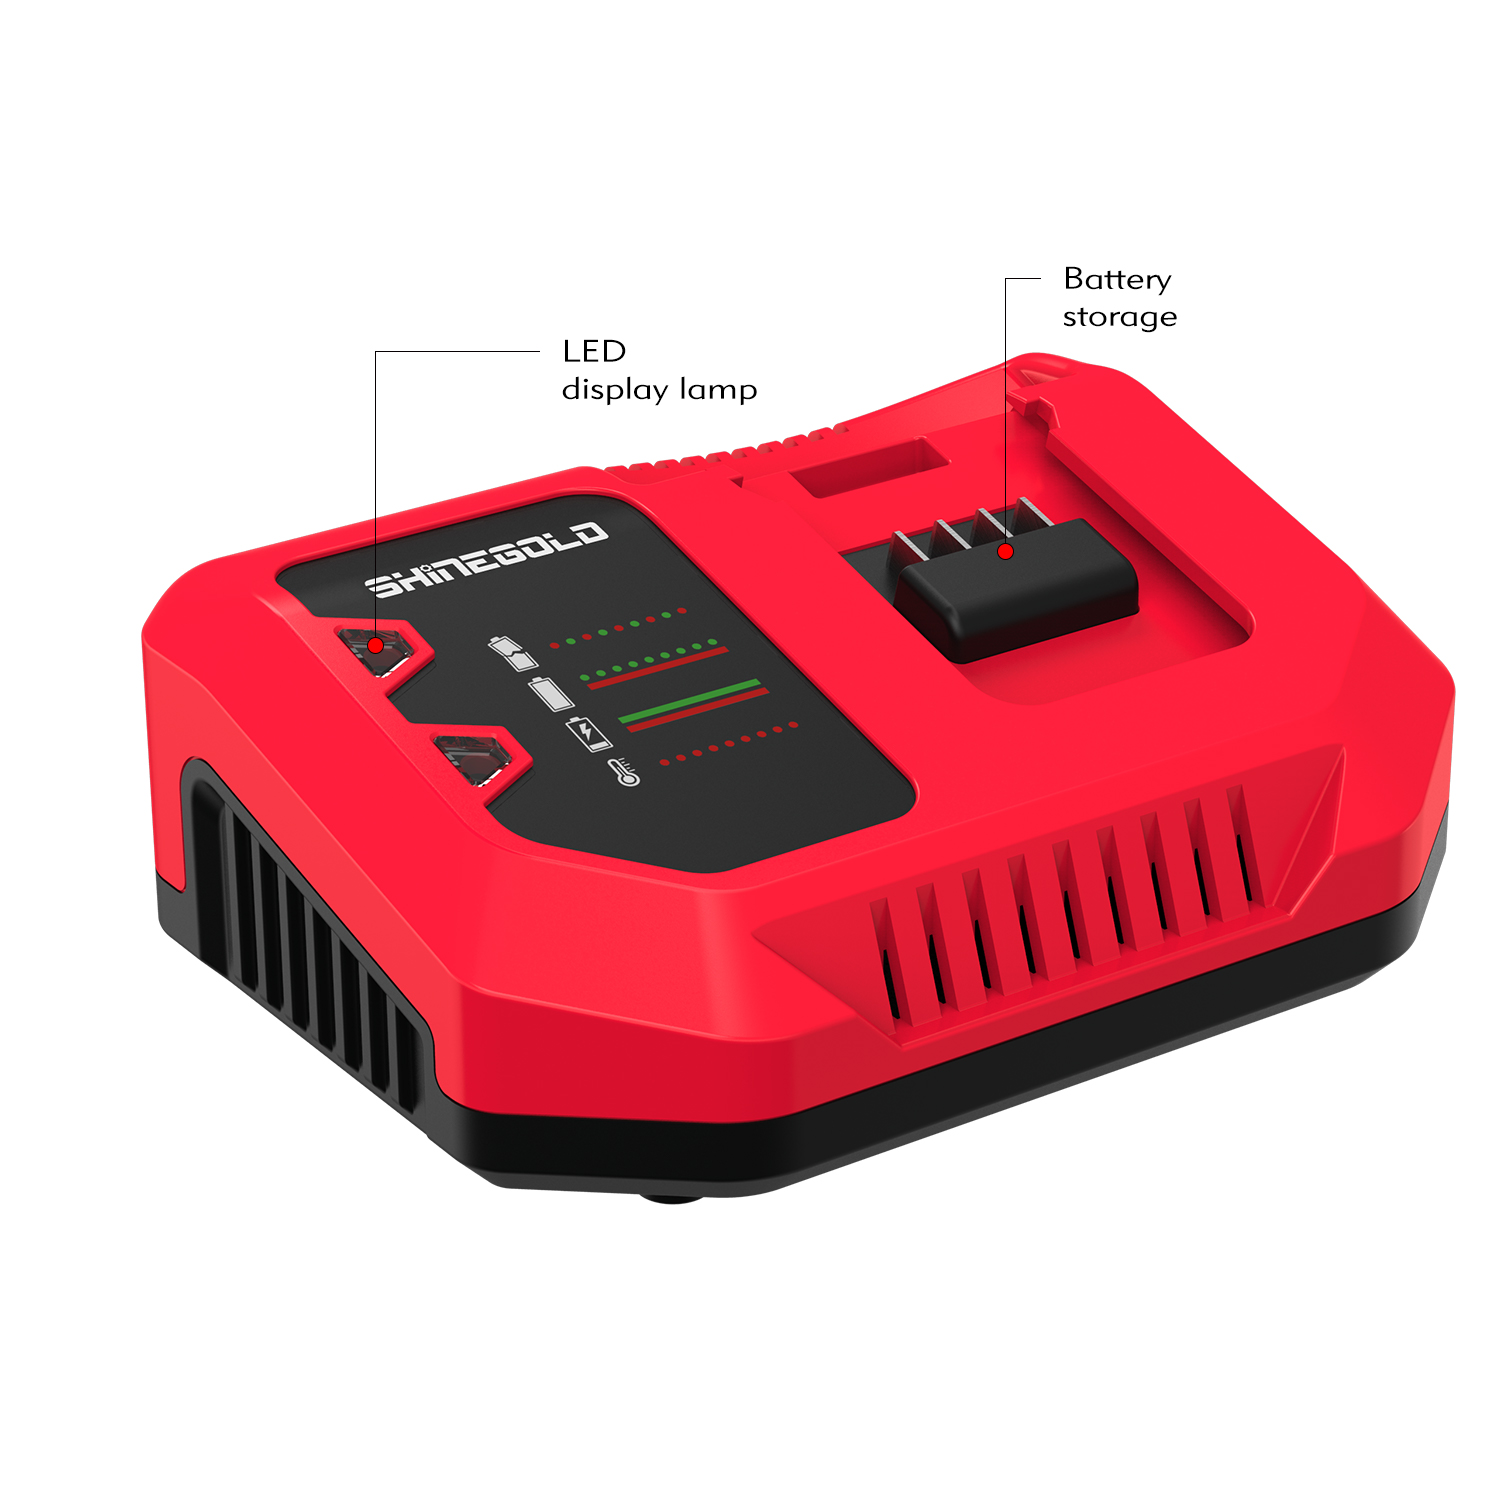 New Arrival 4000mah 20V 4.0 Ah Li-ion Fast Charger with overcharging protection